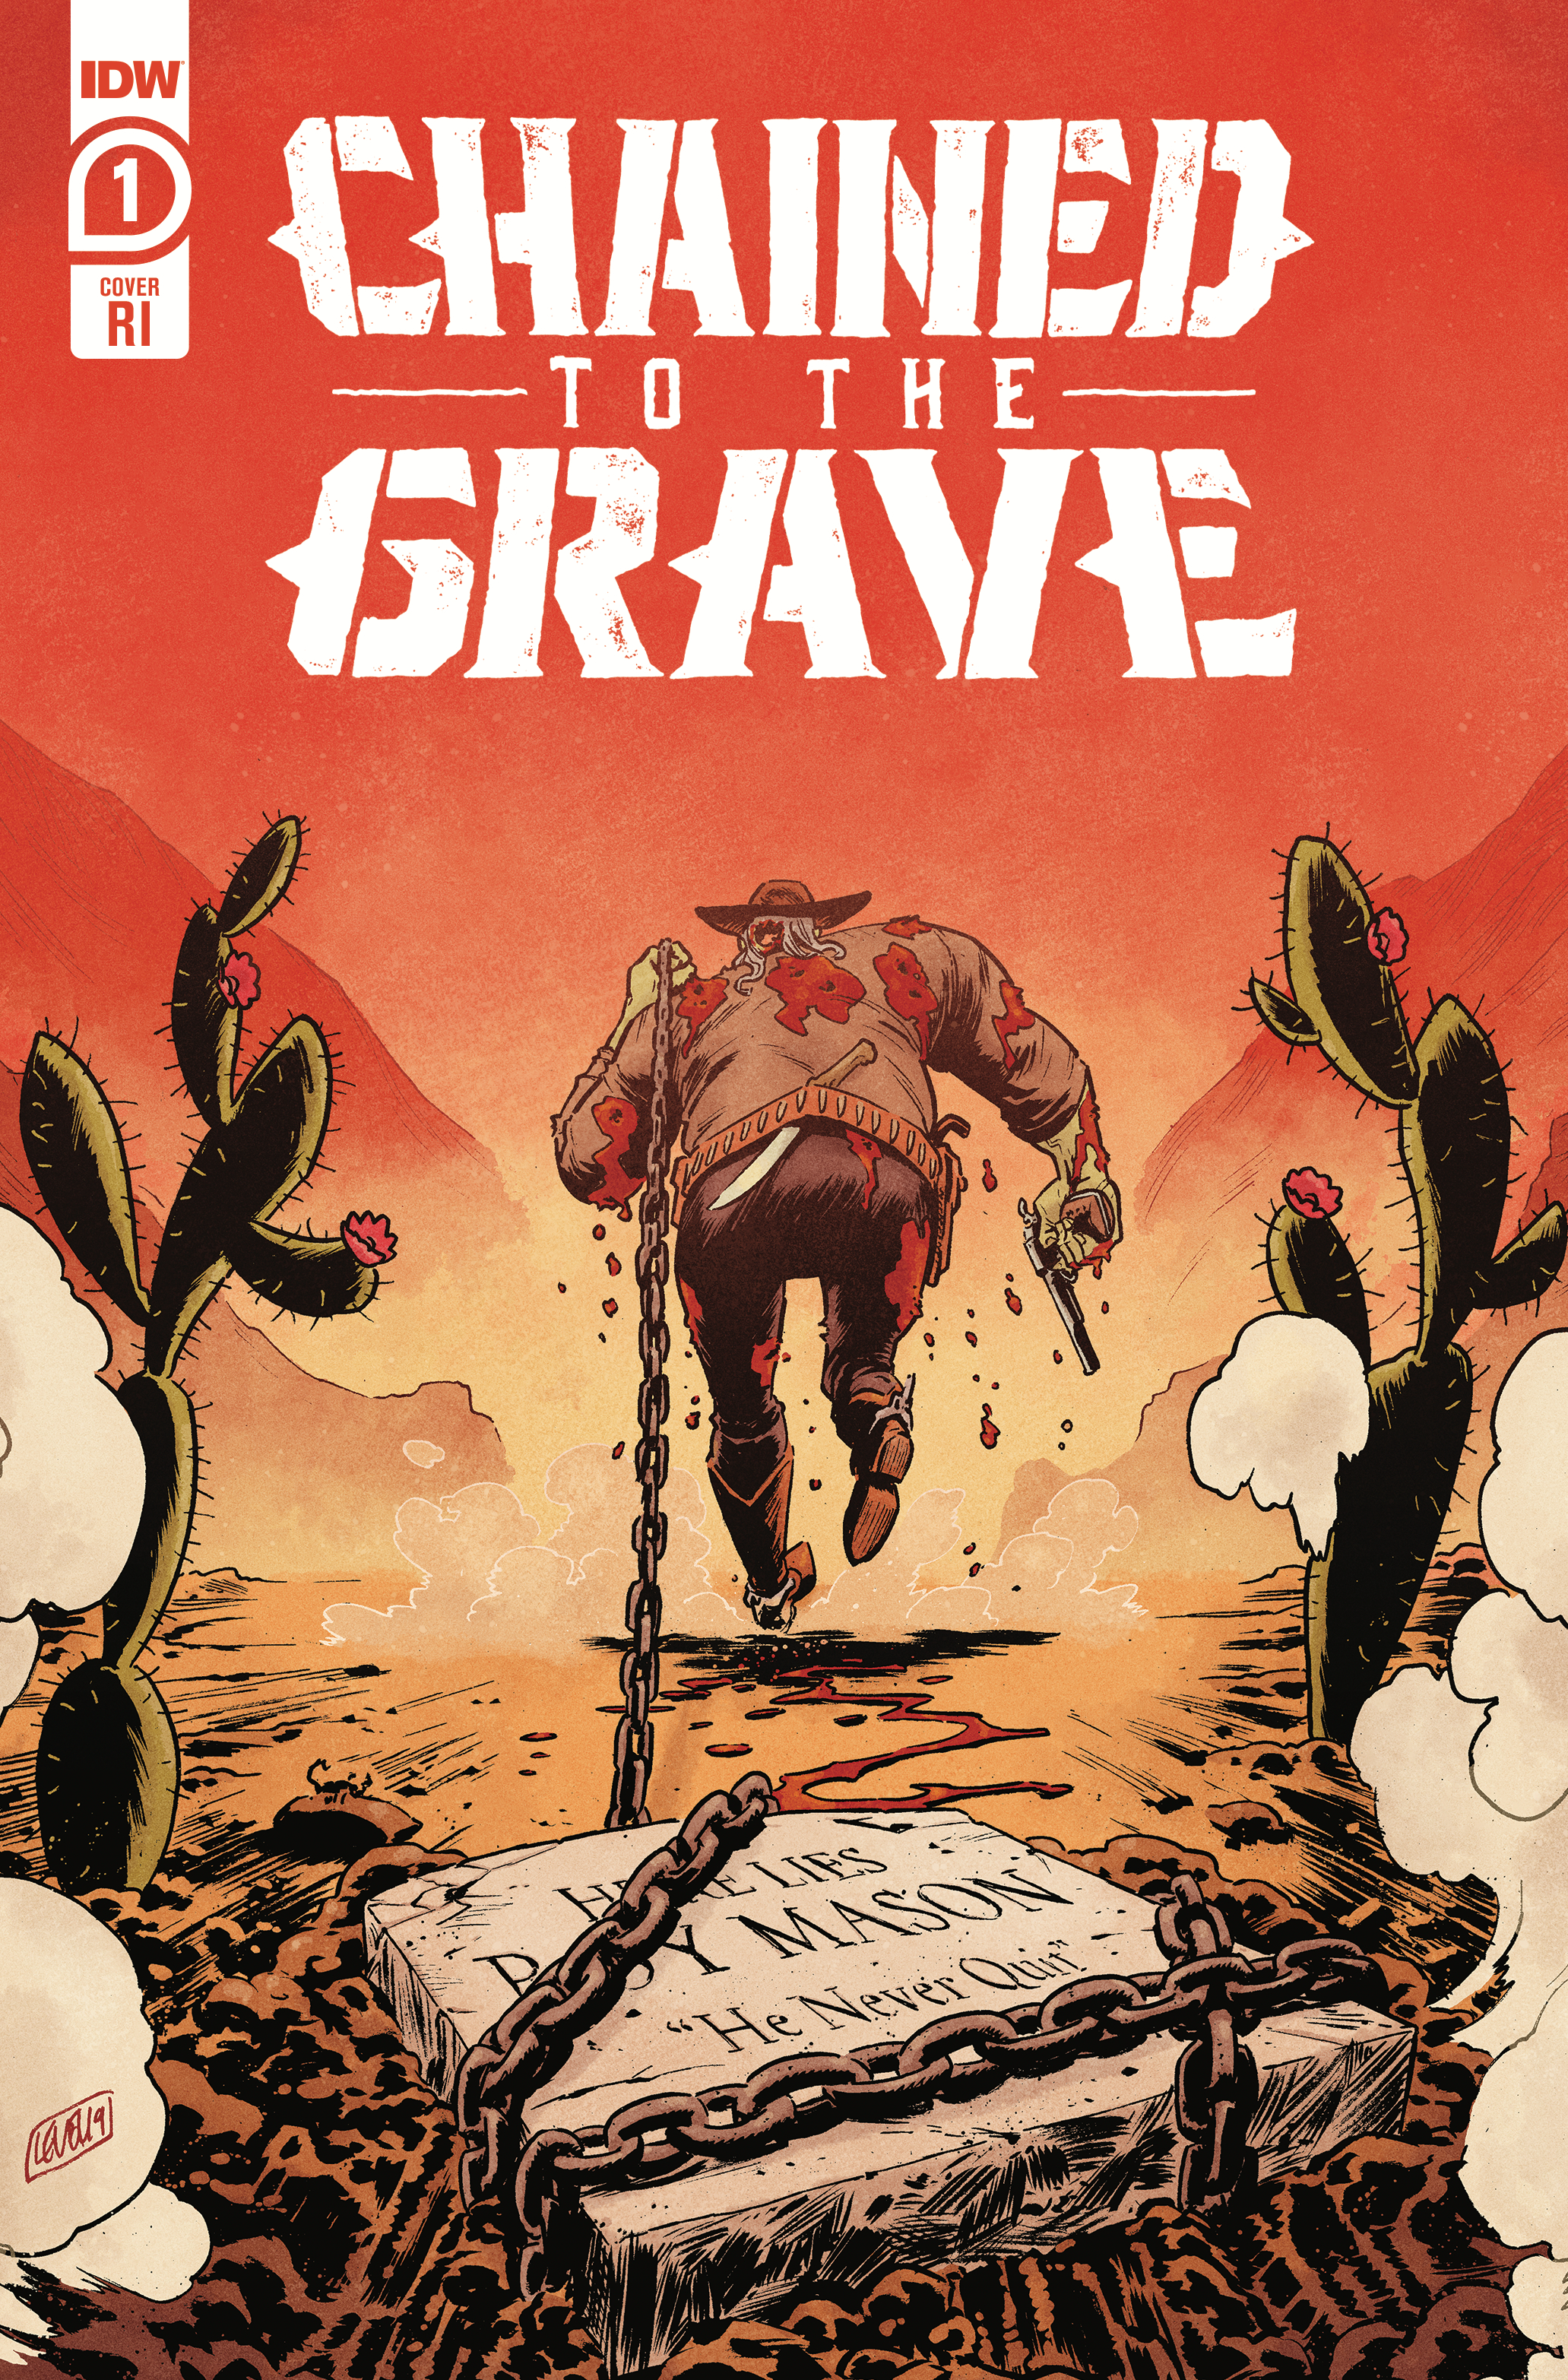 Chained To The Grave #1 1 for 10 Incentive Brian Level (Of 5)